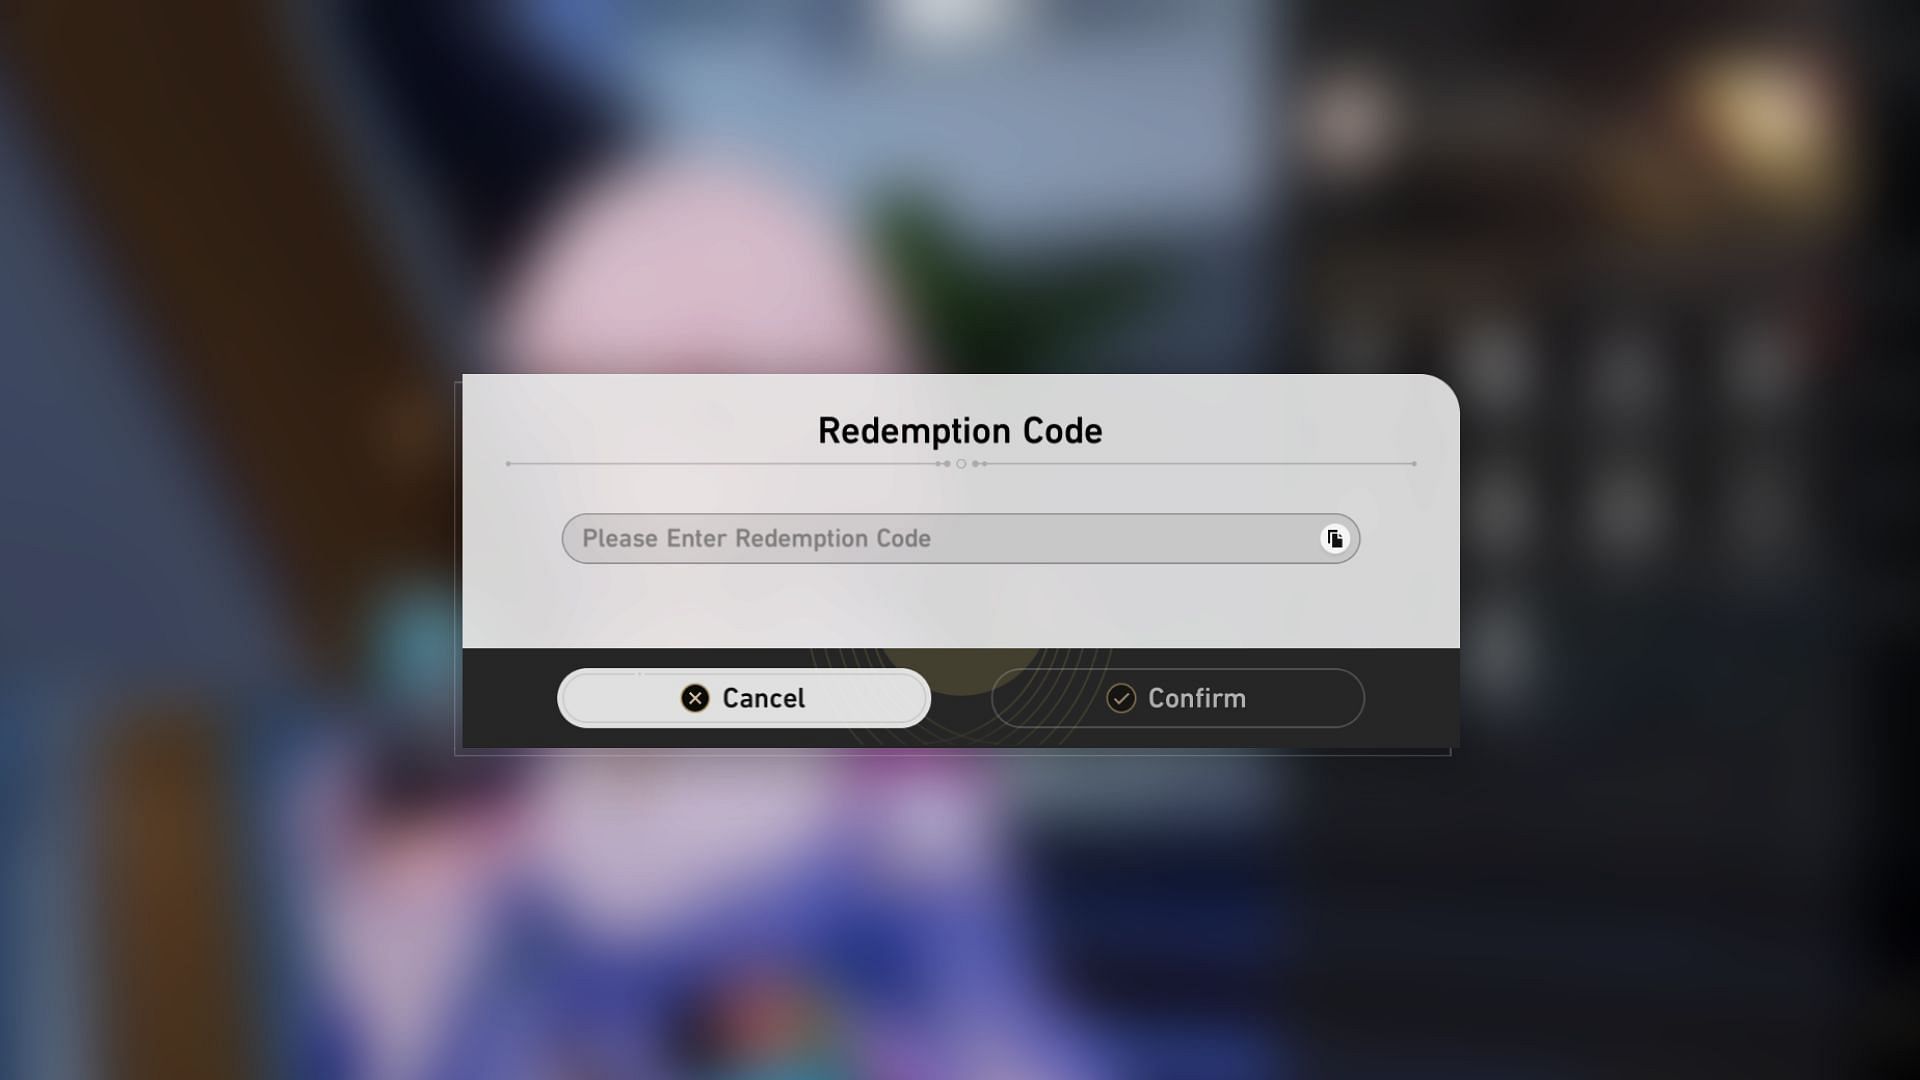 How to Redeem Roblox Codes - Mobile & PC 